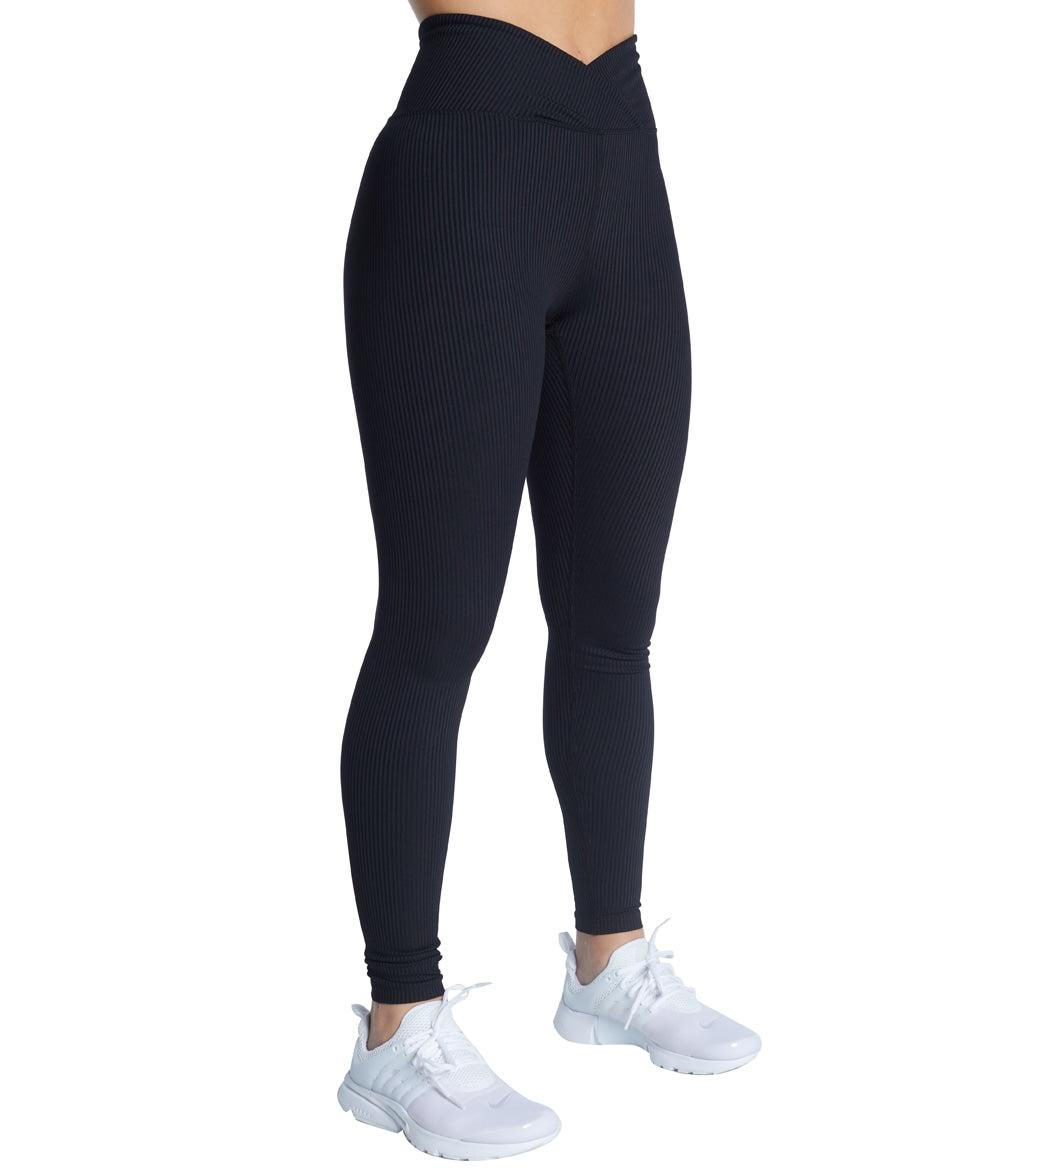 adviicd Yoga Pants For Women Casual Summer Cotton Yoga Pants For Women  Women Sports And Leisure High Wasted pants Suit Legging Sets Fitness  Women's